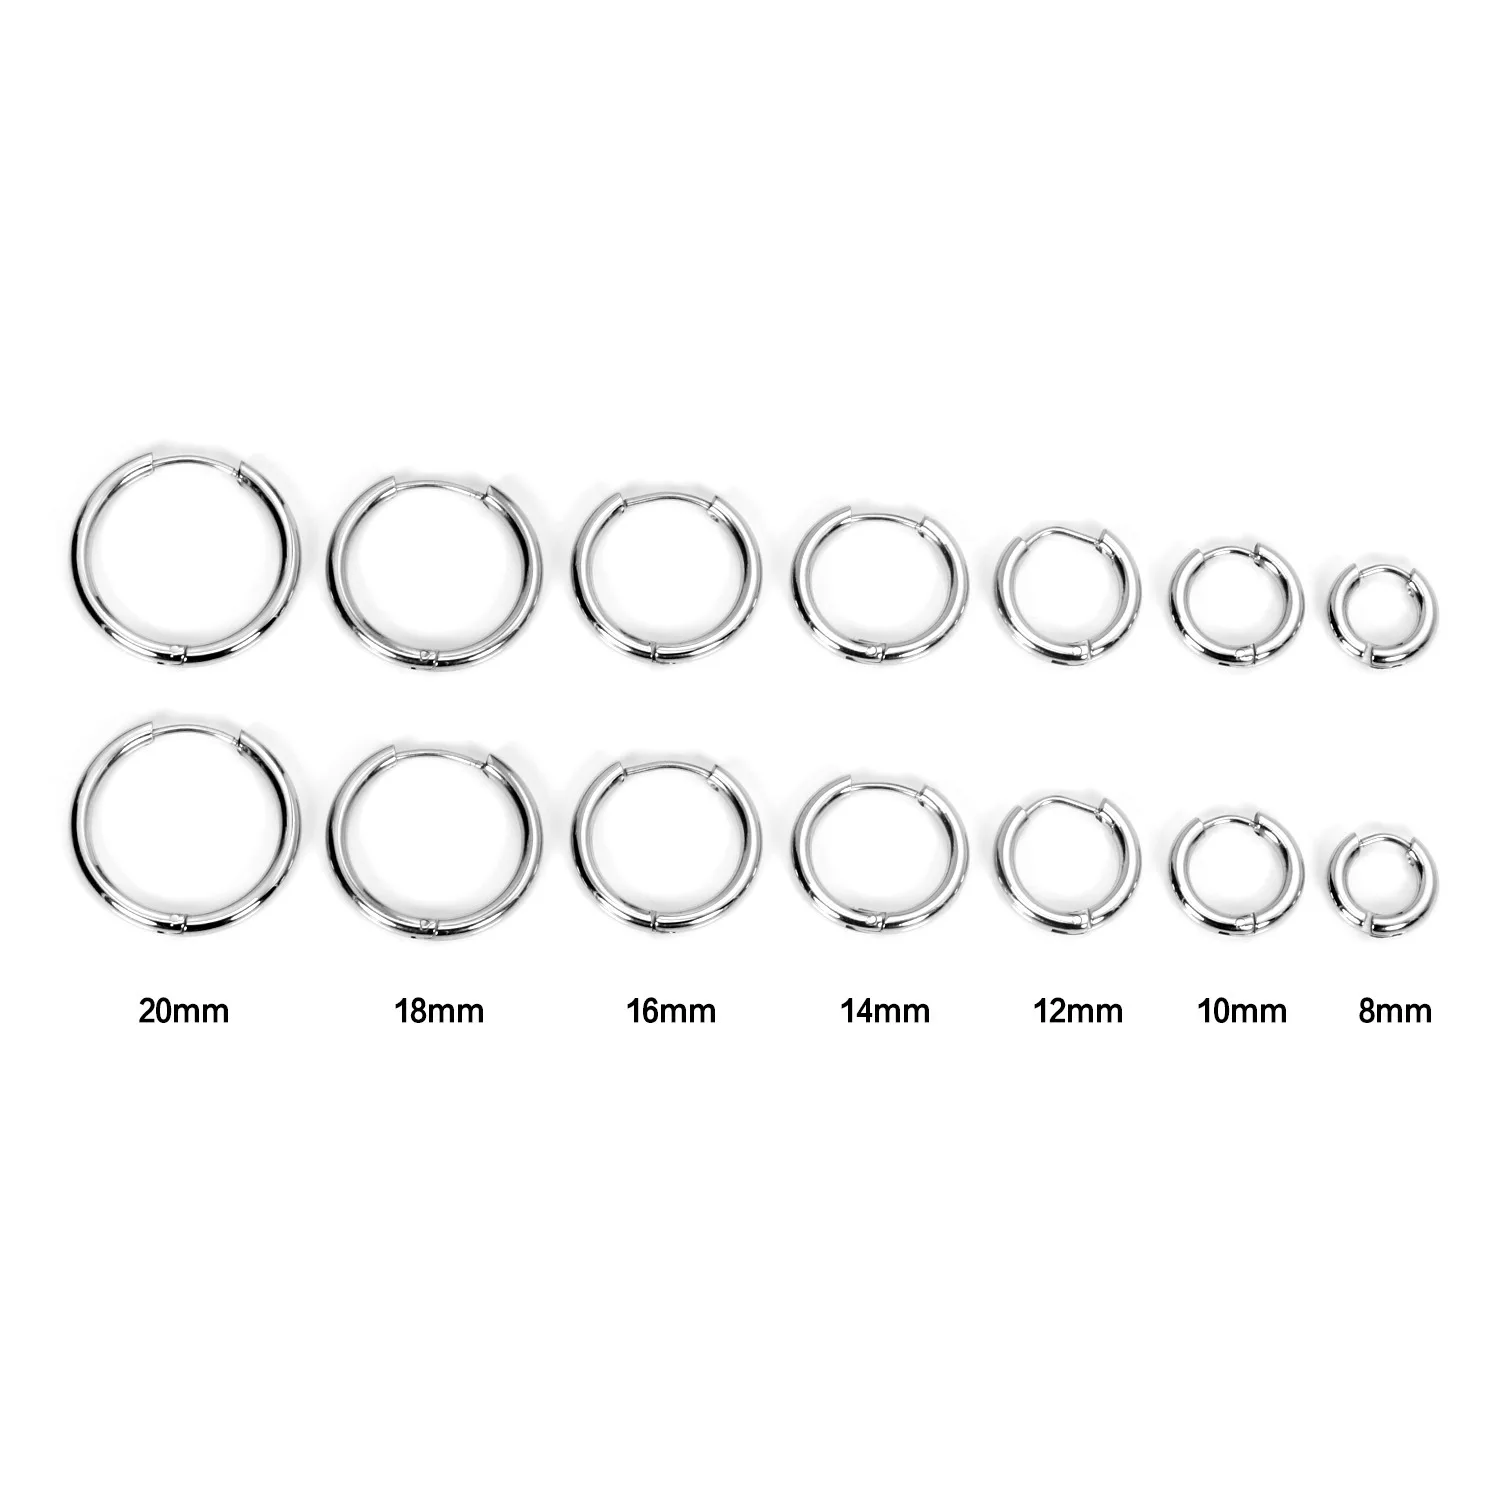 

Fashionsimple silver round stainless steel with different sizes ear clip special-interest earrings wholesale sales